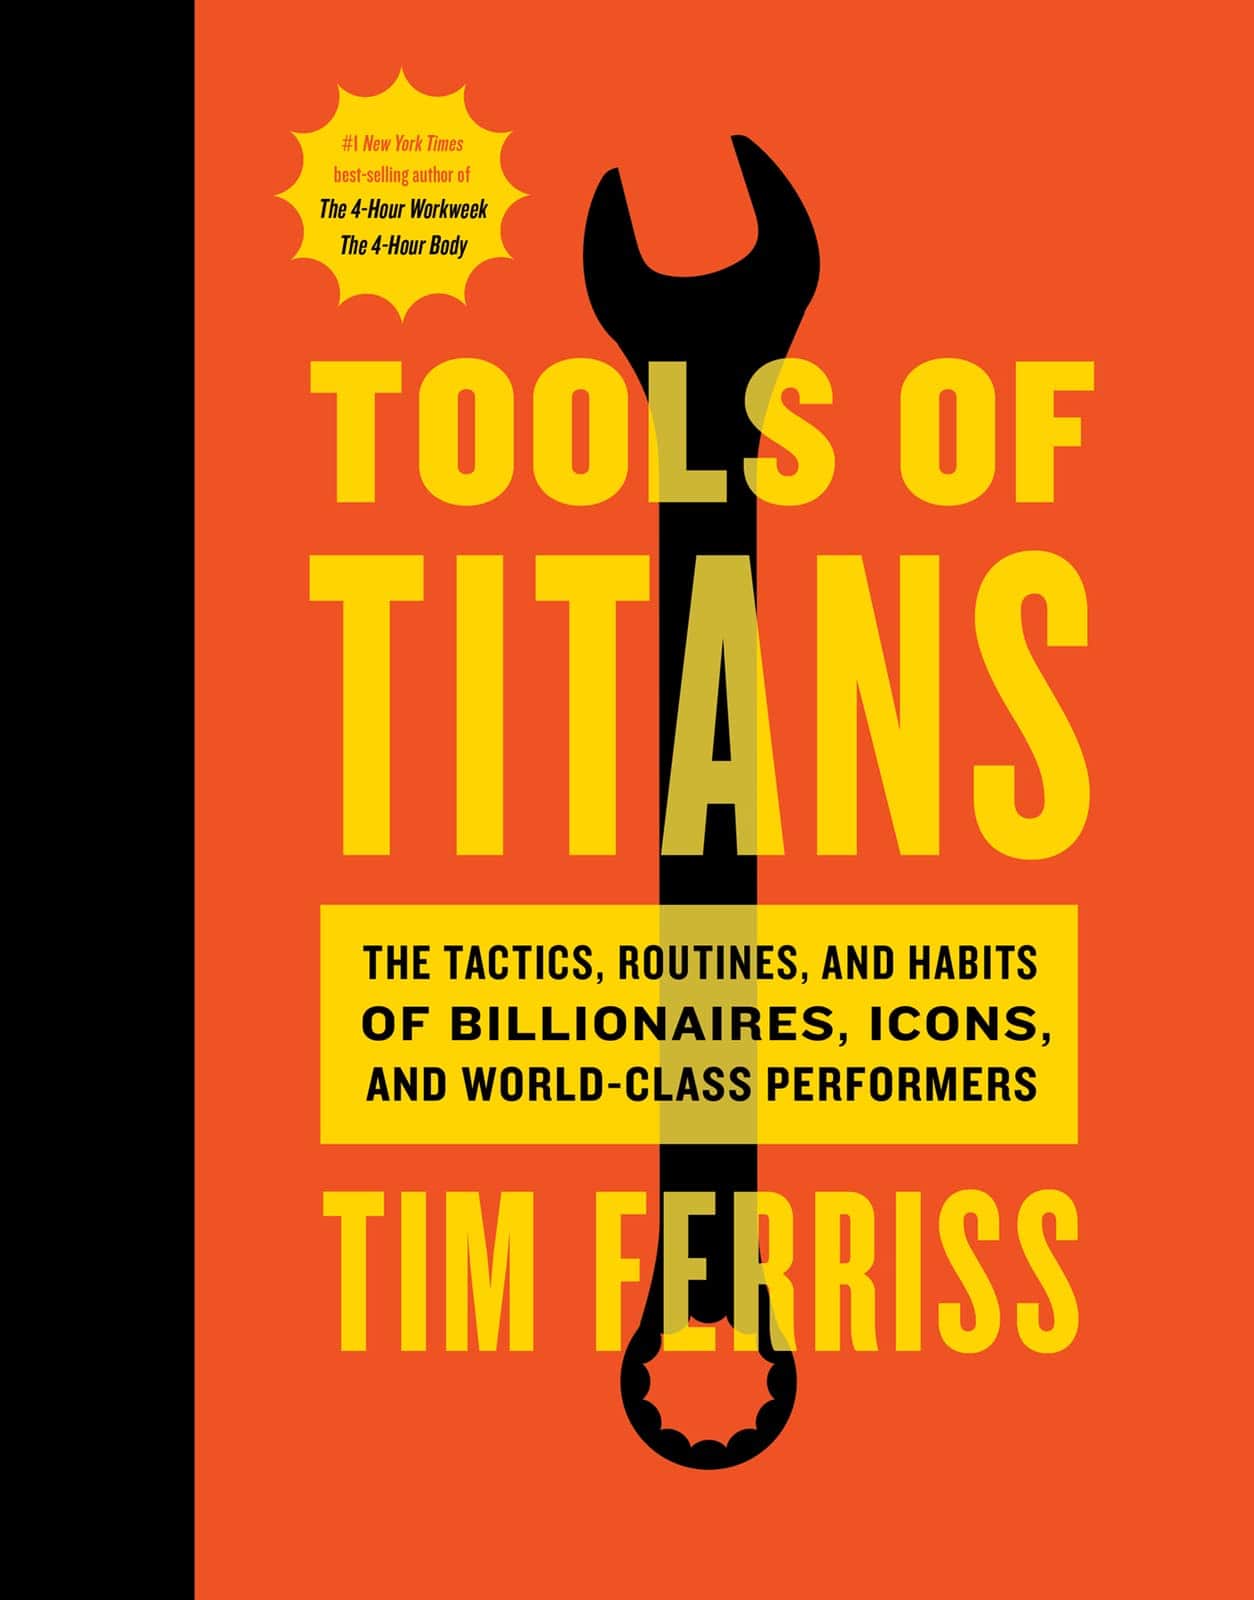 Book: Tools of Titans, by Tim Ferriss 